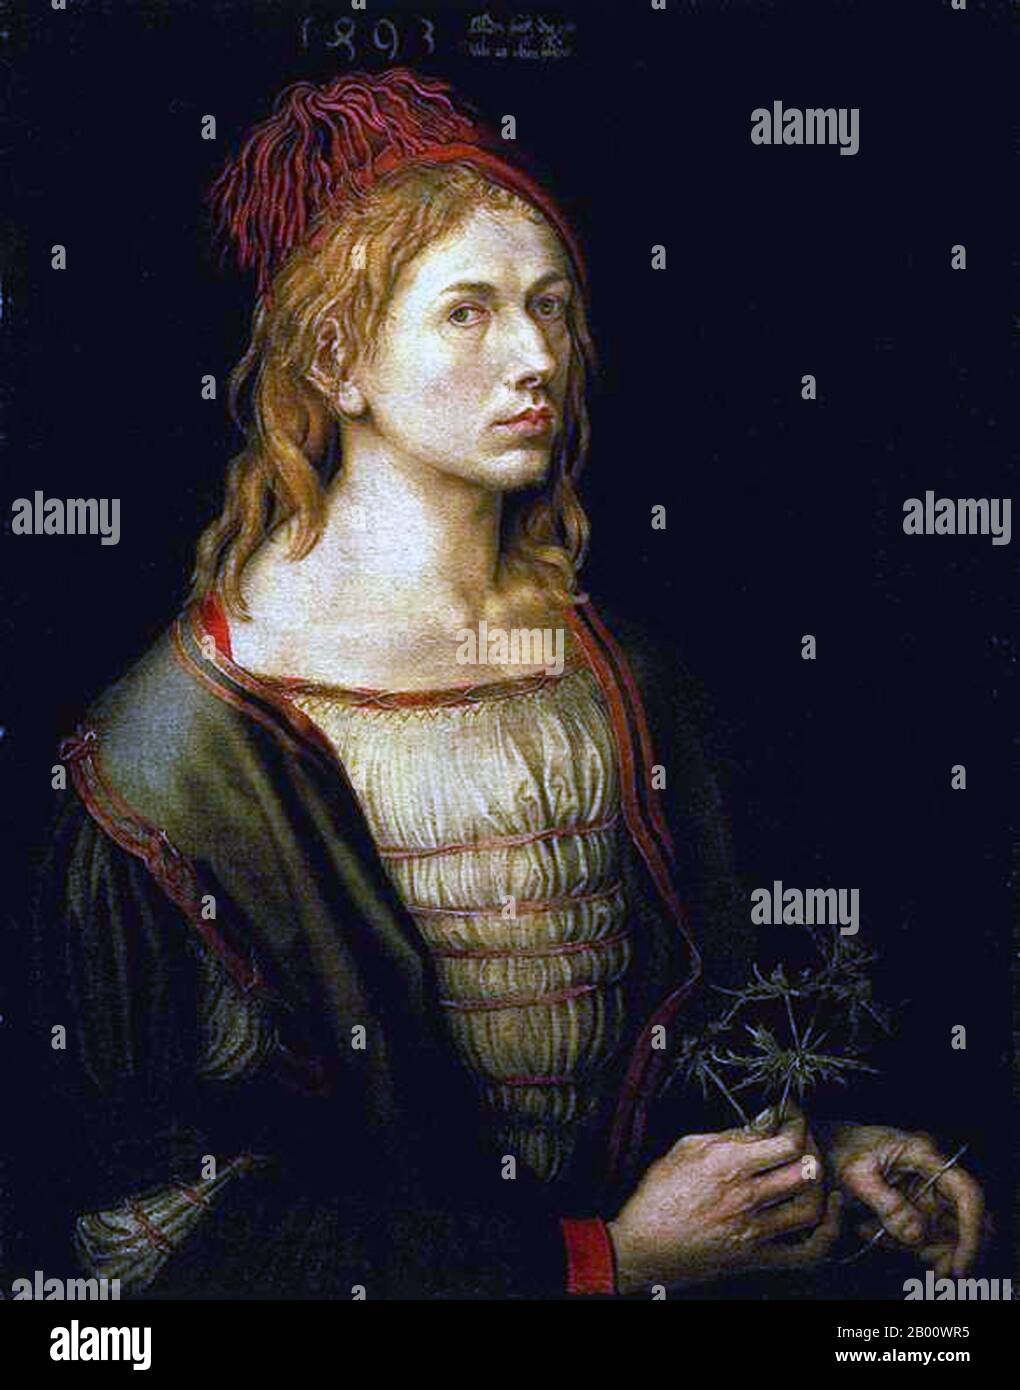 Germany: 'Self-portrait of the Artist Holding a Thistle'. Oil on canvas painting by Albrecht Dürer (1471-1528), 1493.  Albrecht Dürer (21 May 1471 – 6 April 1528) was a German painter, printmaker and theorist from Nuremberg. His prints established his reputation across Europe when he was still in his twenties, and he has been conventionally regarded as the greatest artist of the Northern Renaissance ever since. Dürer's introduction of classical motifs into Northern art, through his knowledge of Italian artists and German humanists, have secured his important reputation. Stock Photo